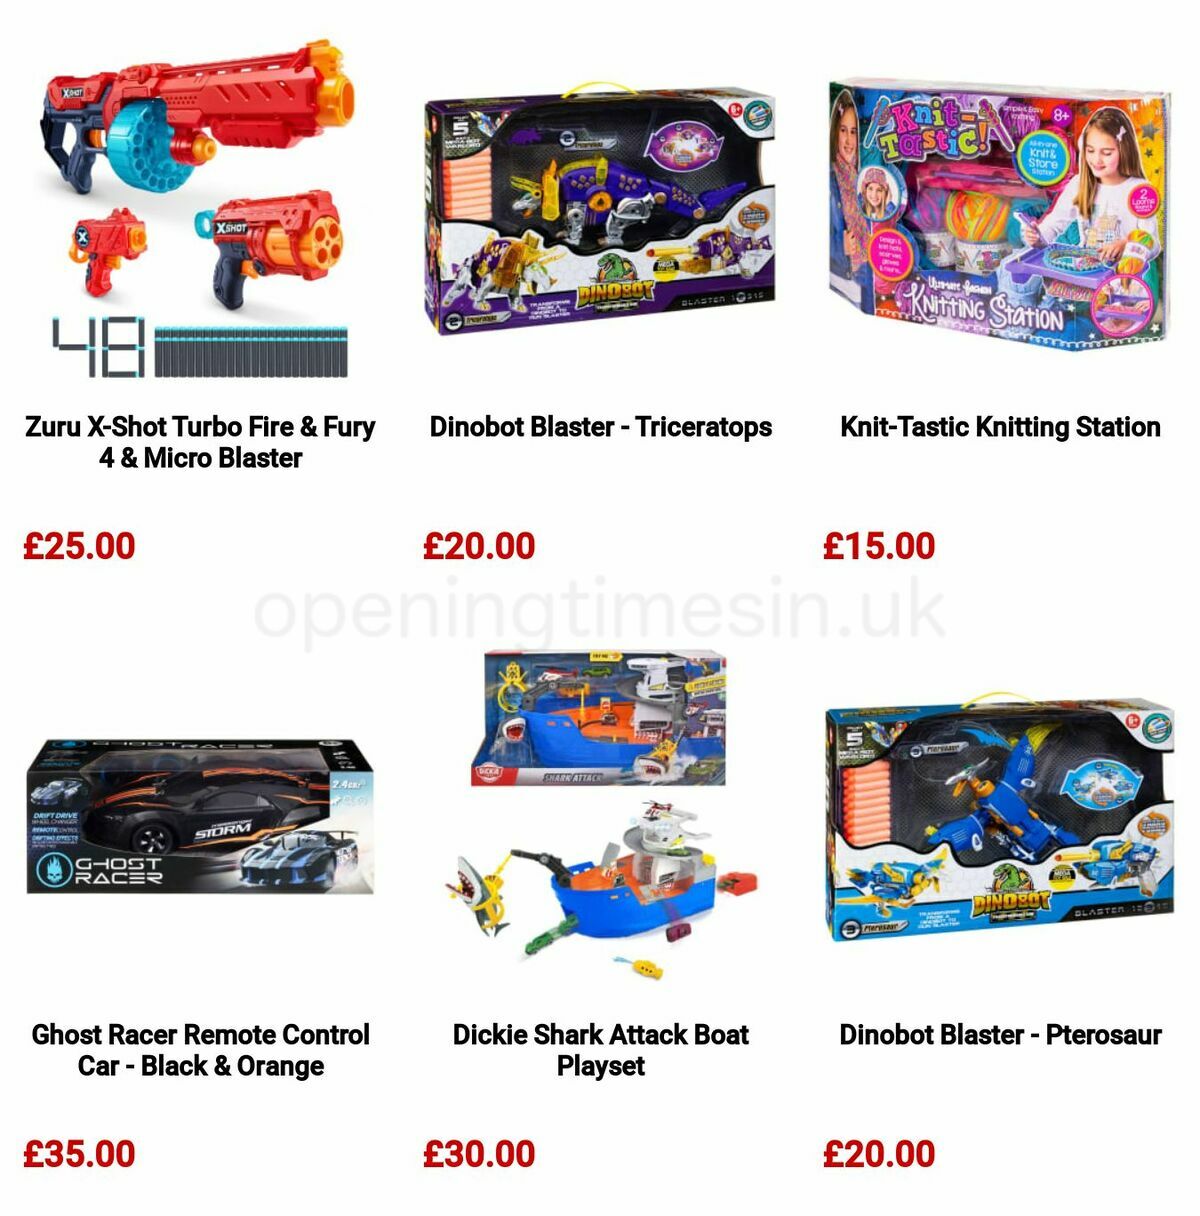 B&M Mega Toy Event Offers from 17 October